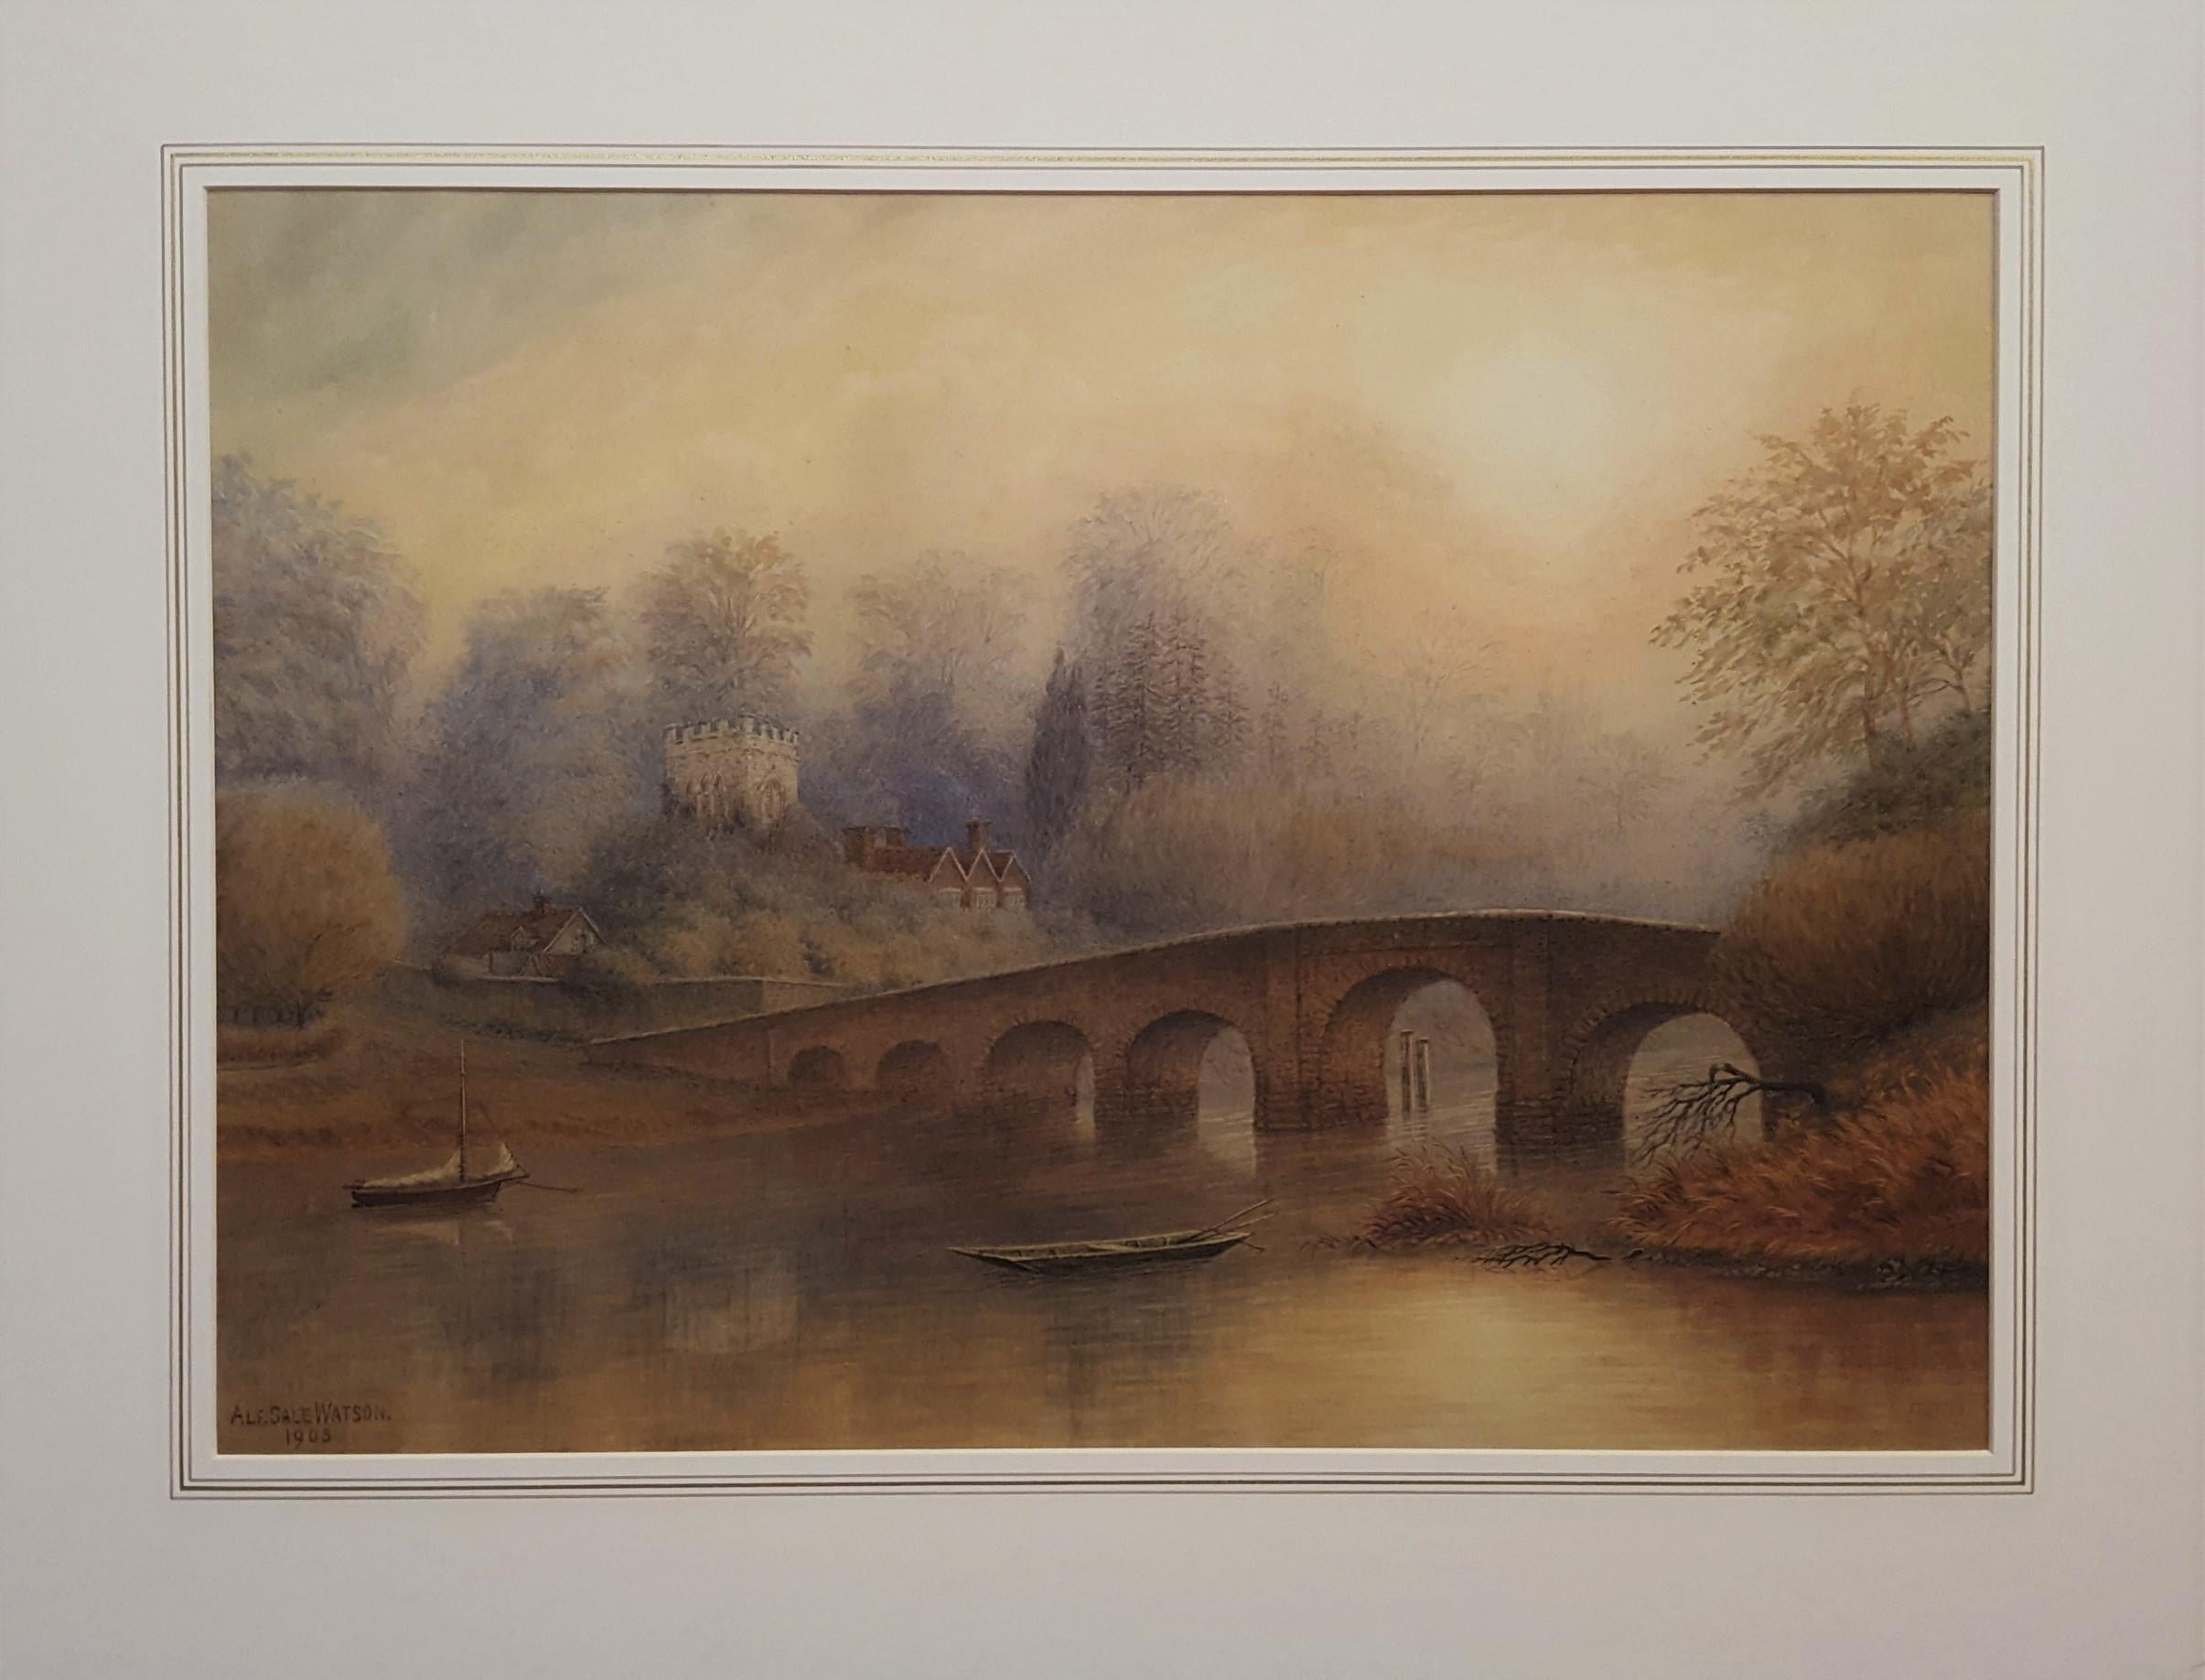 Bridge at Sonning on Thames /// Antique British Watercolor Bridge Architecture  - Art by Alfred Sale Watson